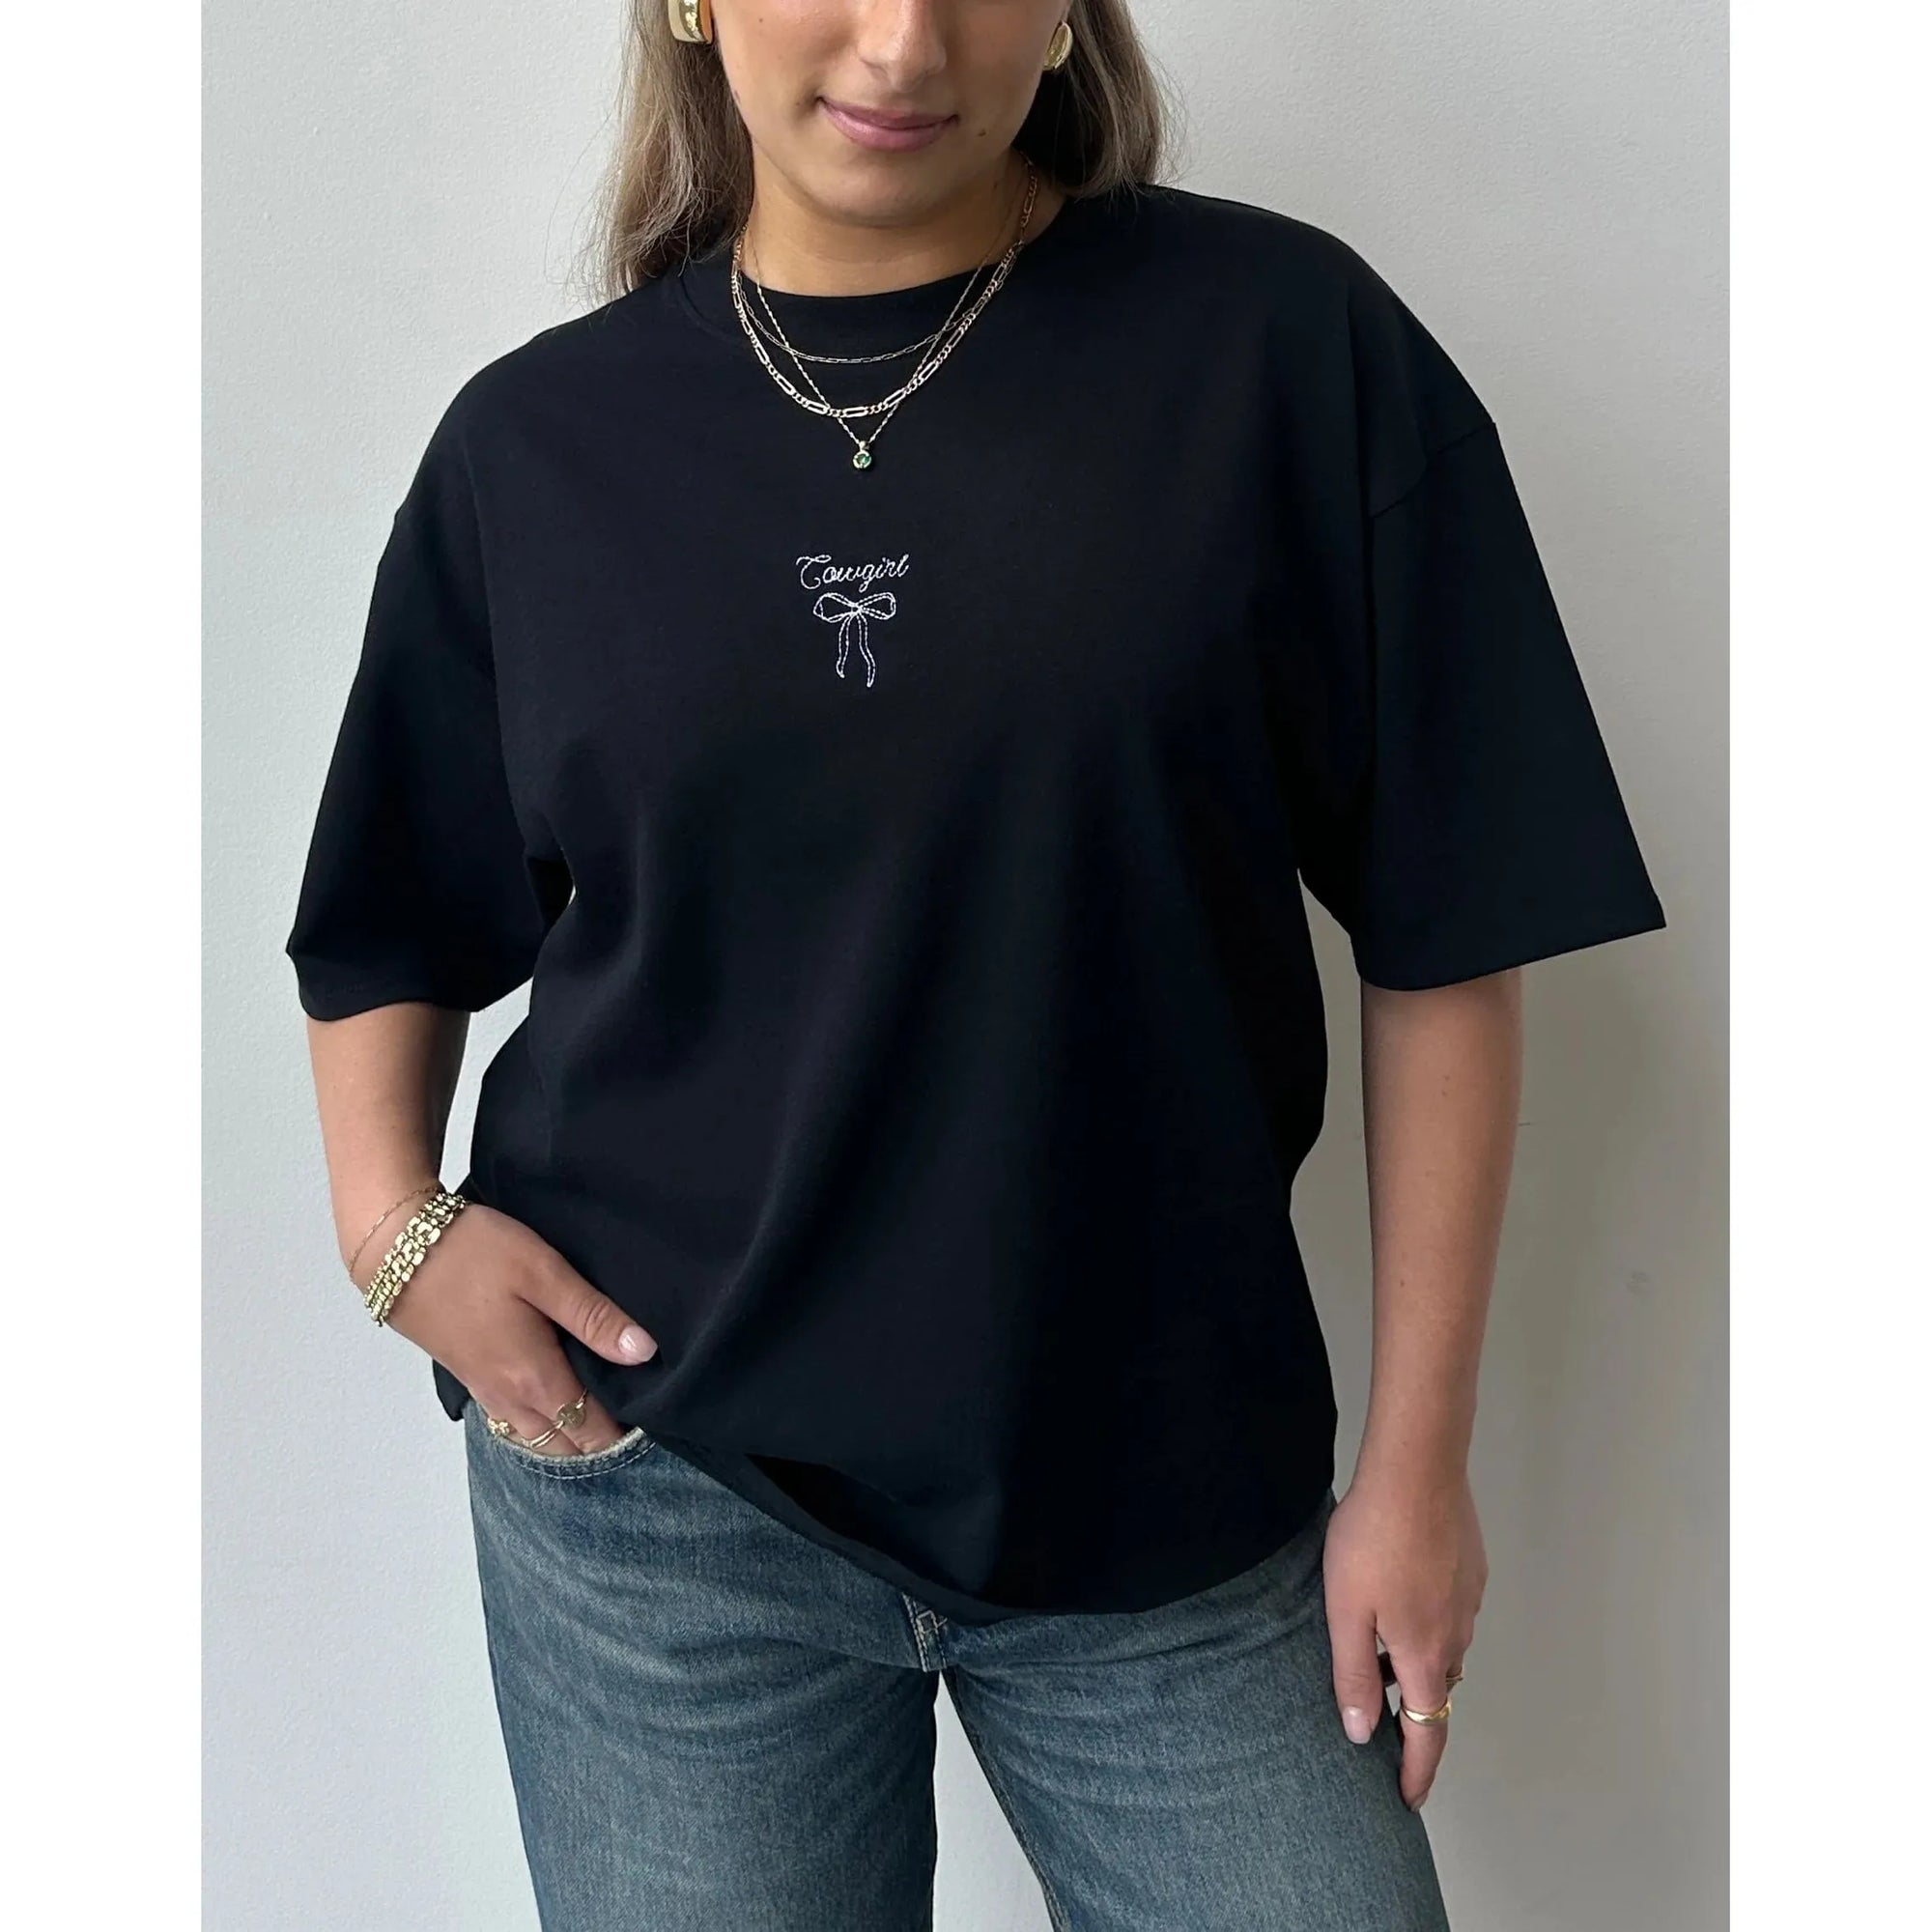 Brunette the Label Black / XS-S Brunette the Label Cowgirl Bow Boxy Tee